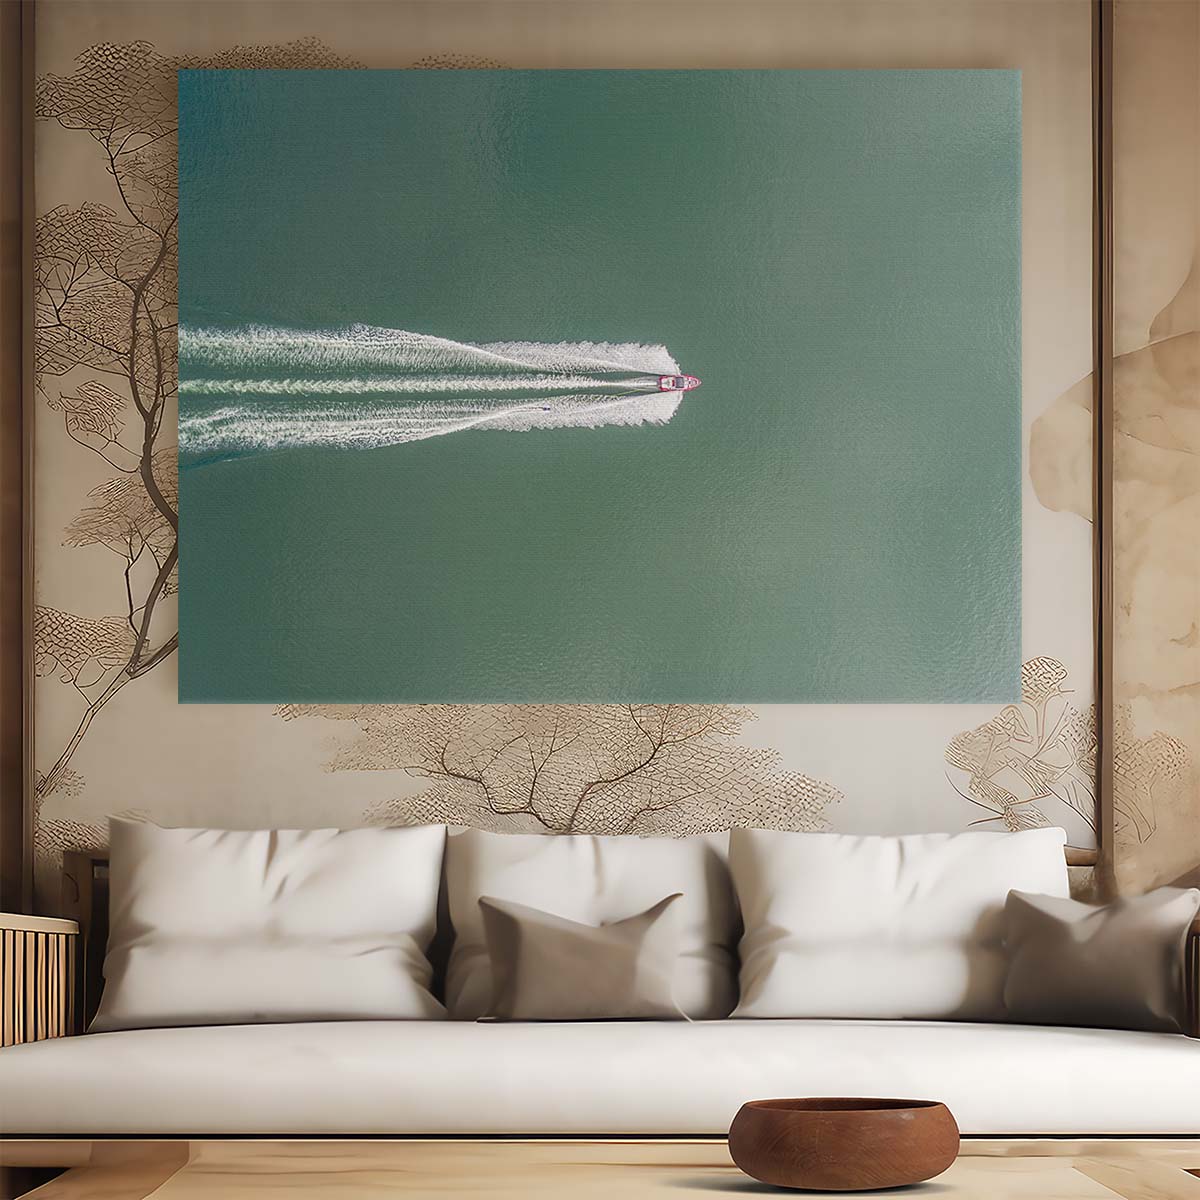 Speedboat Race Minimalist Aerial Seascape Wall Art by Luxuriance Designs. Made in USA.